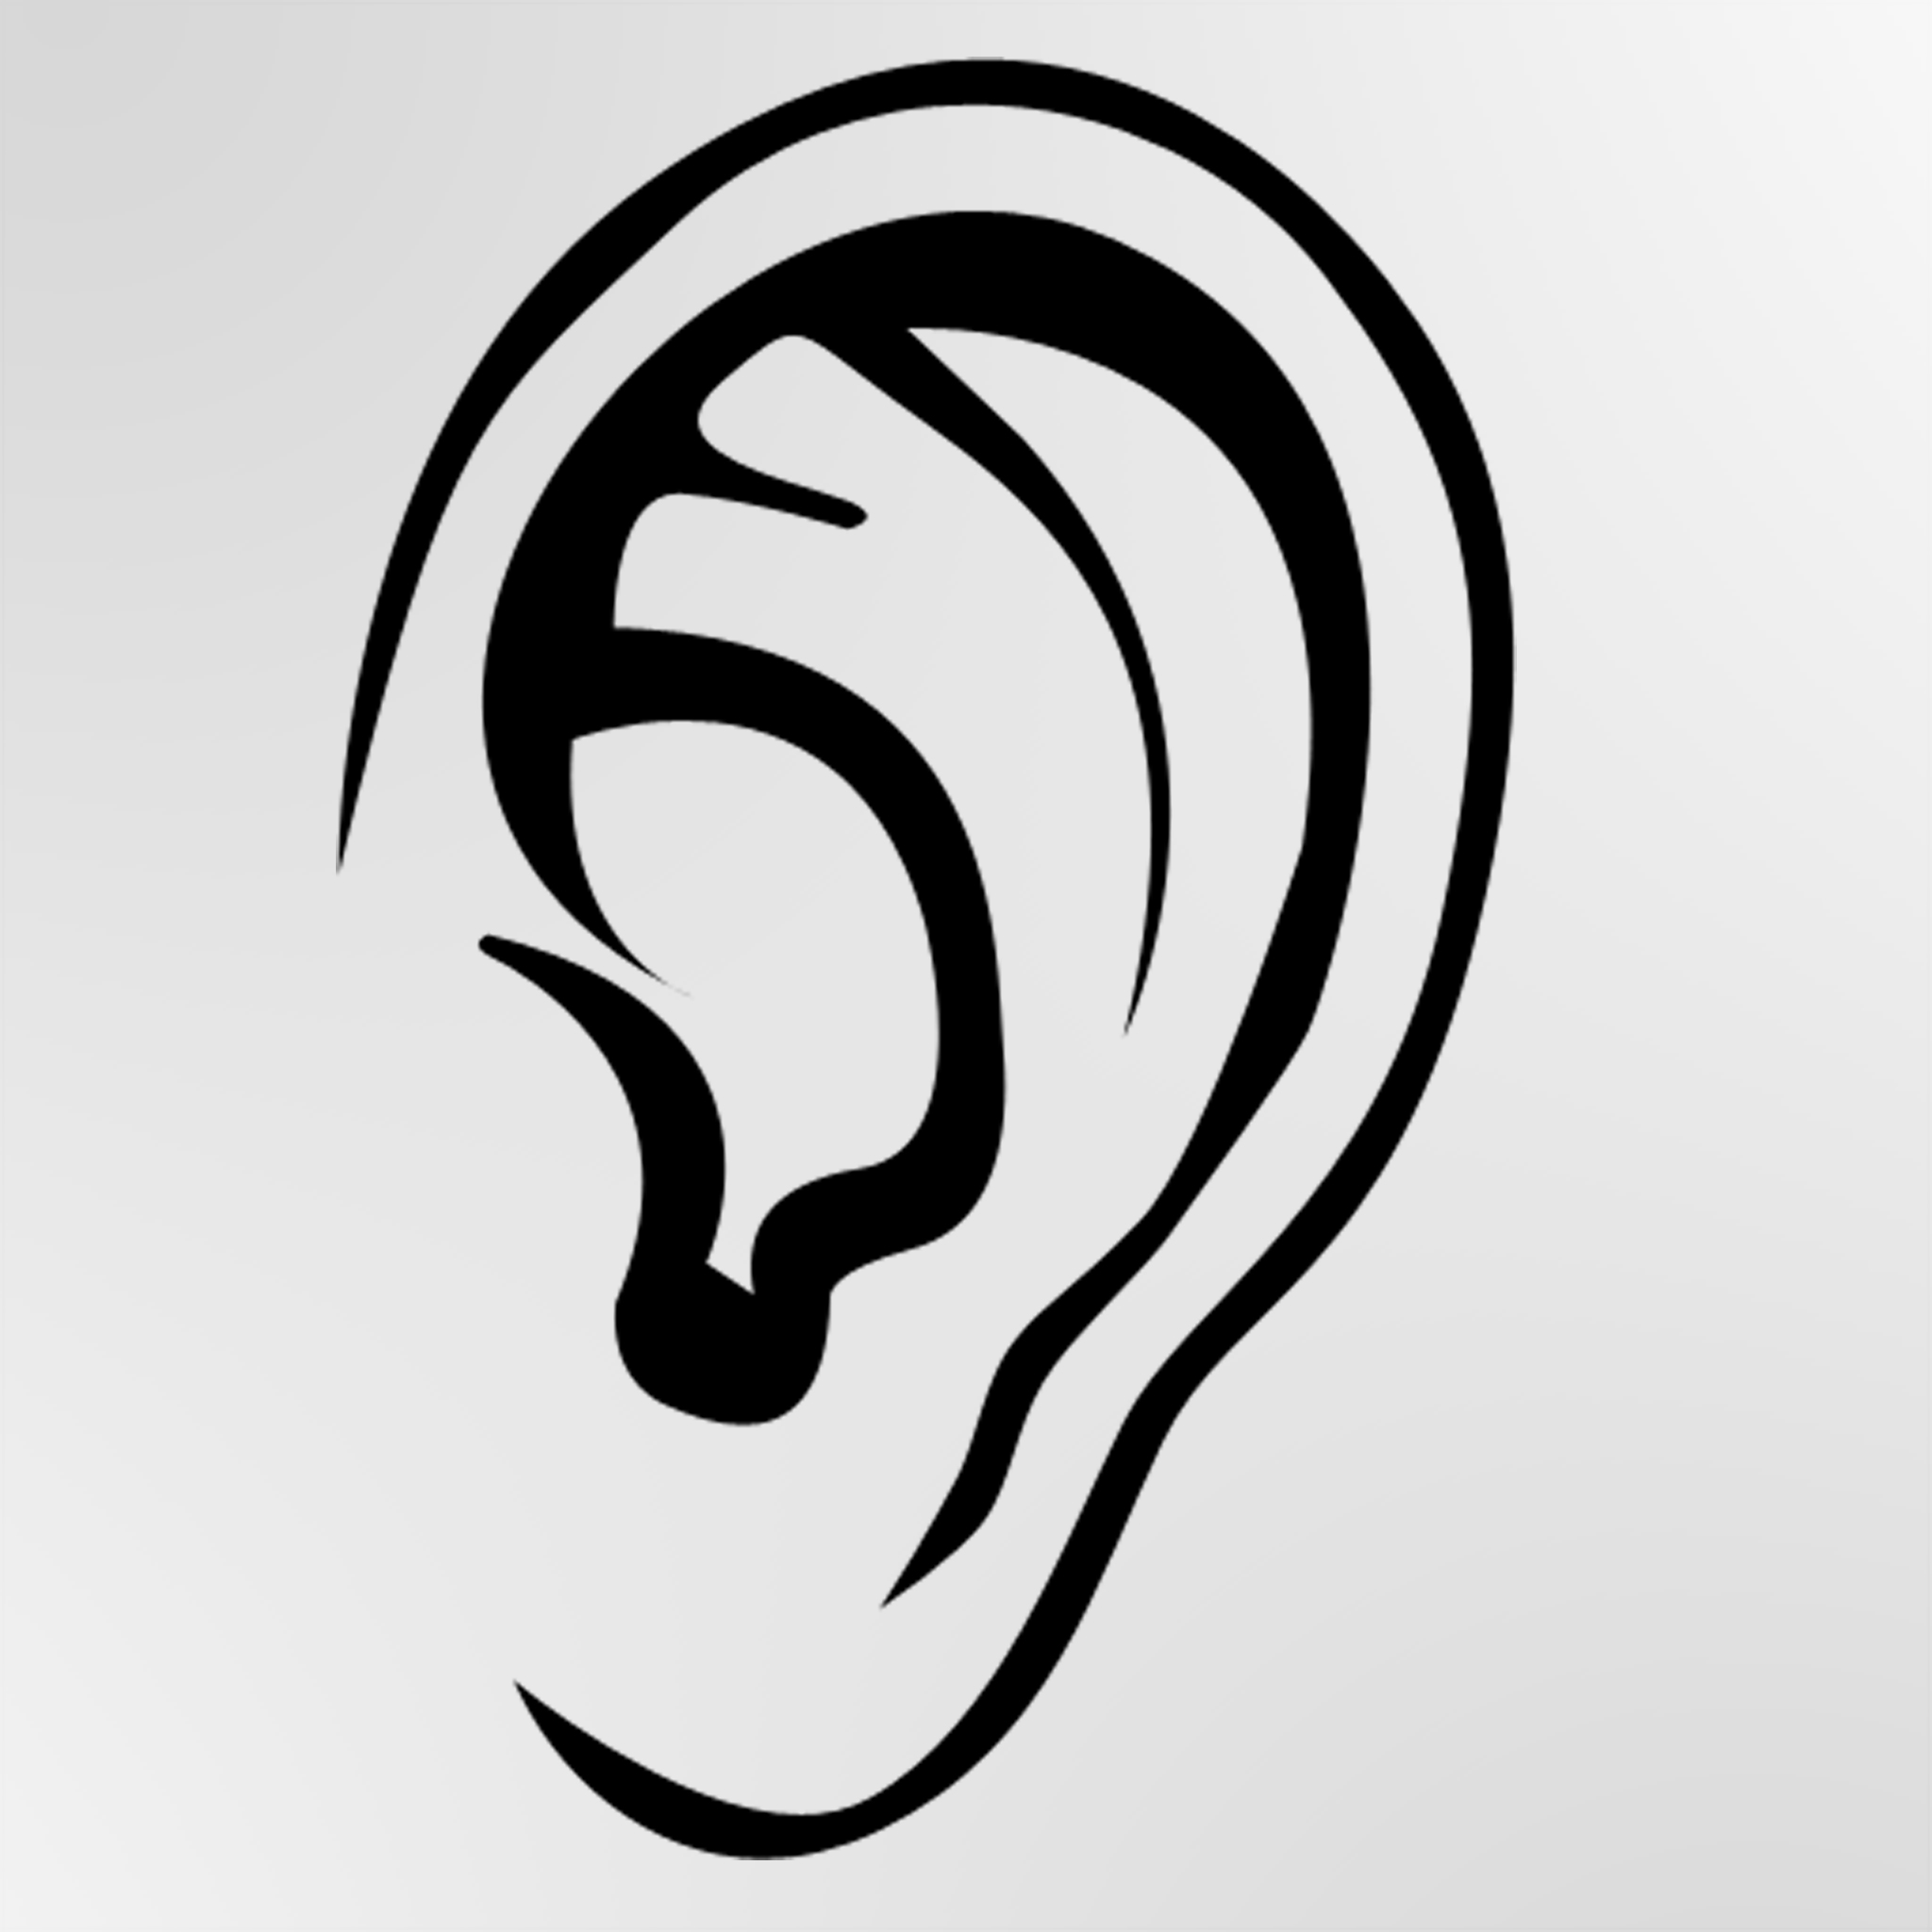 Ear clipart images image